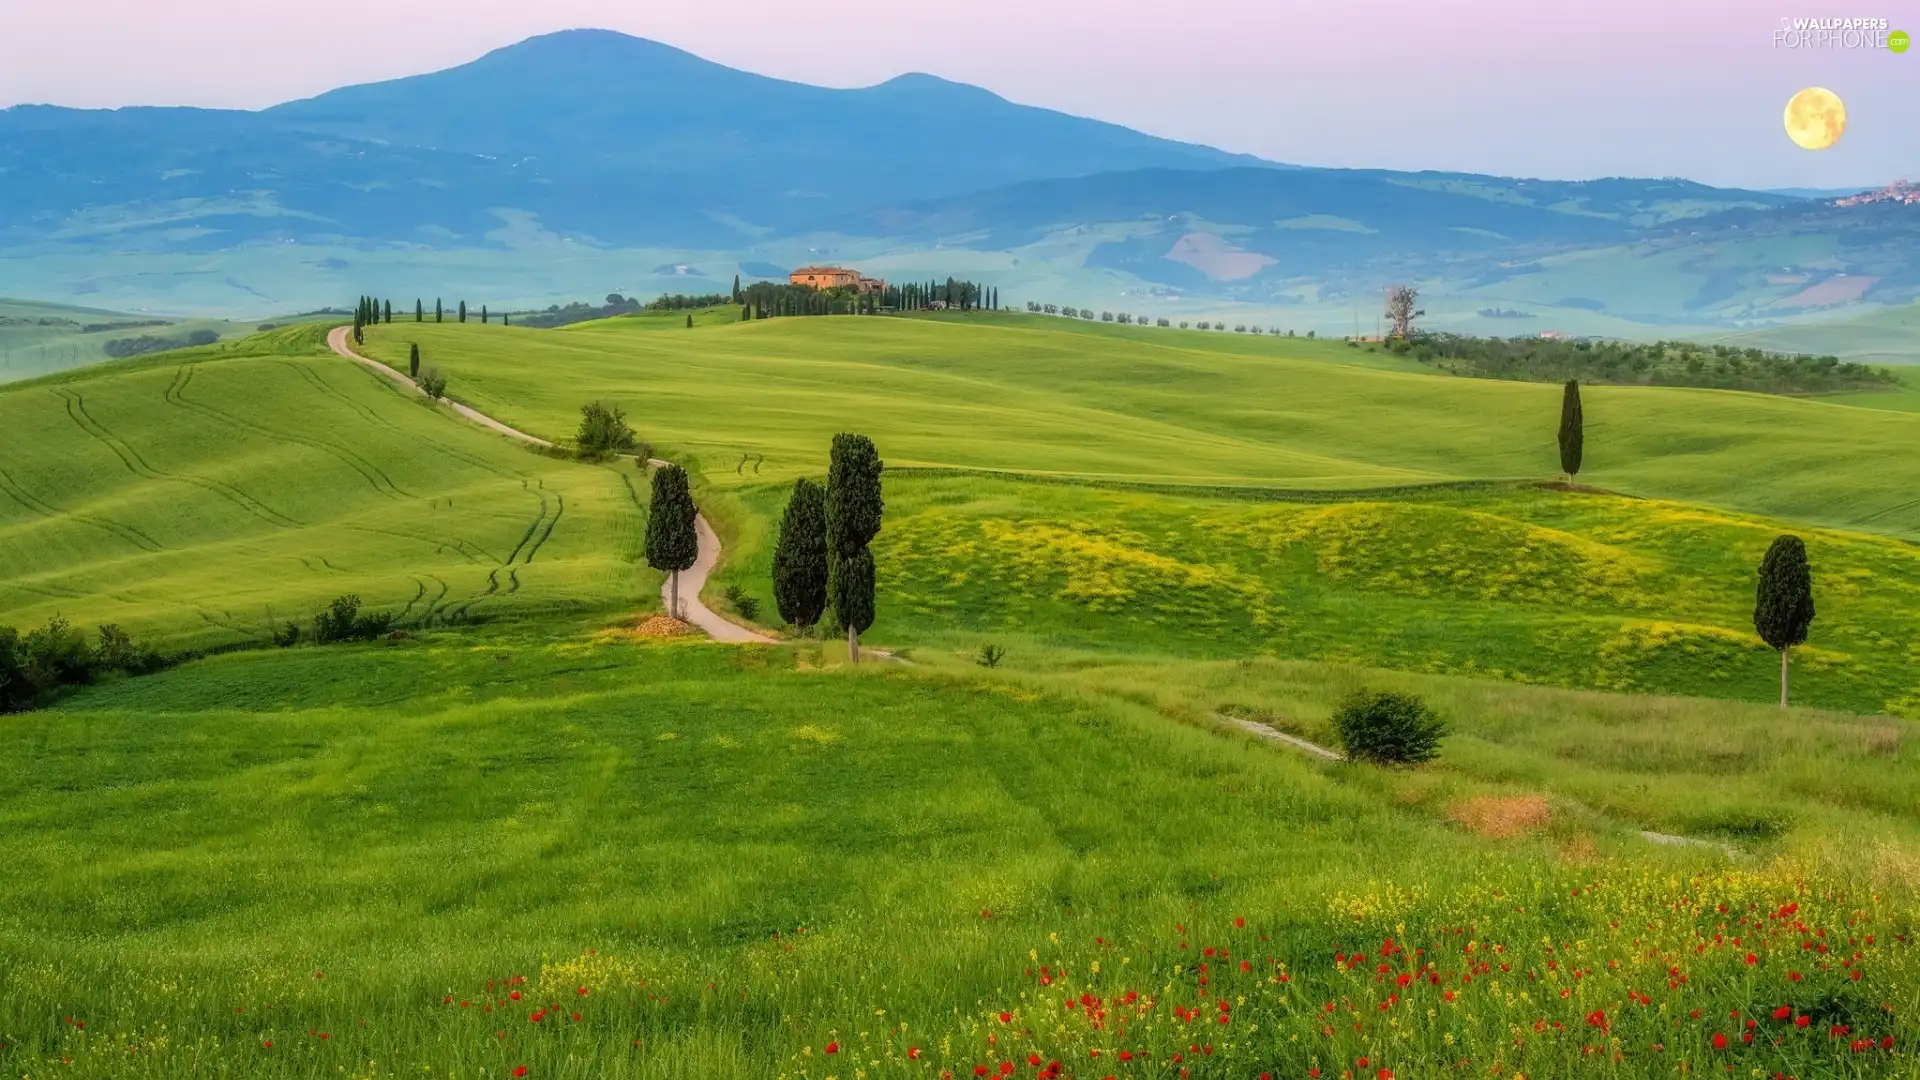 The Hills, Way, Great Sunsets, cypresses, Flowers, Tuscany, Italy, grass